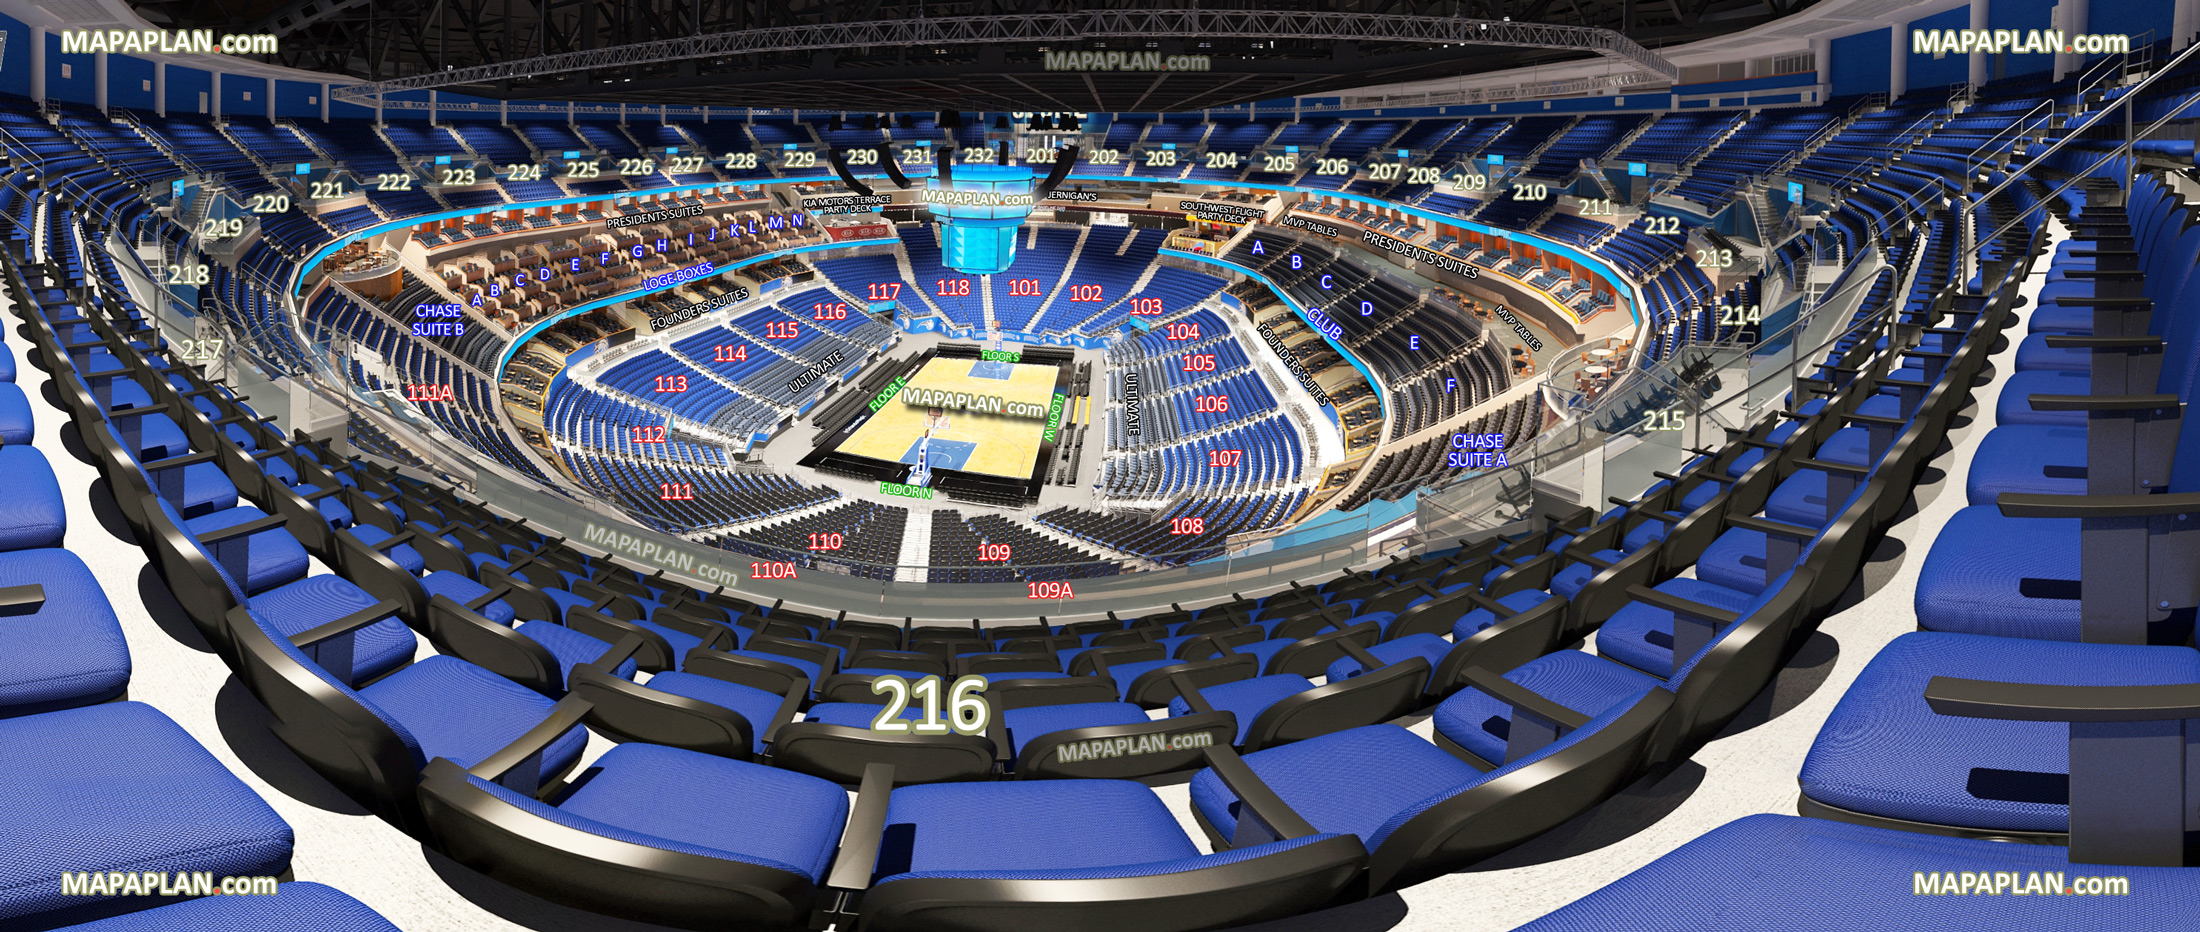 Amway Center Concert Seating Chart